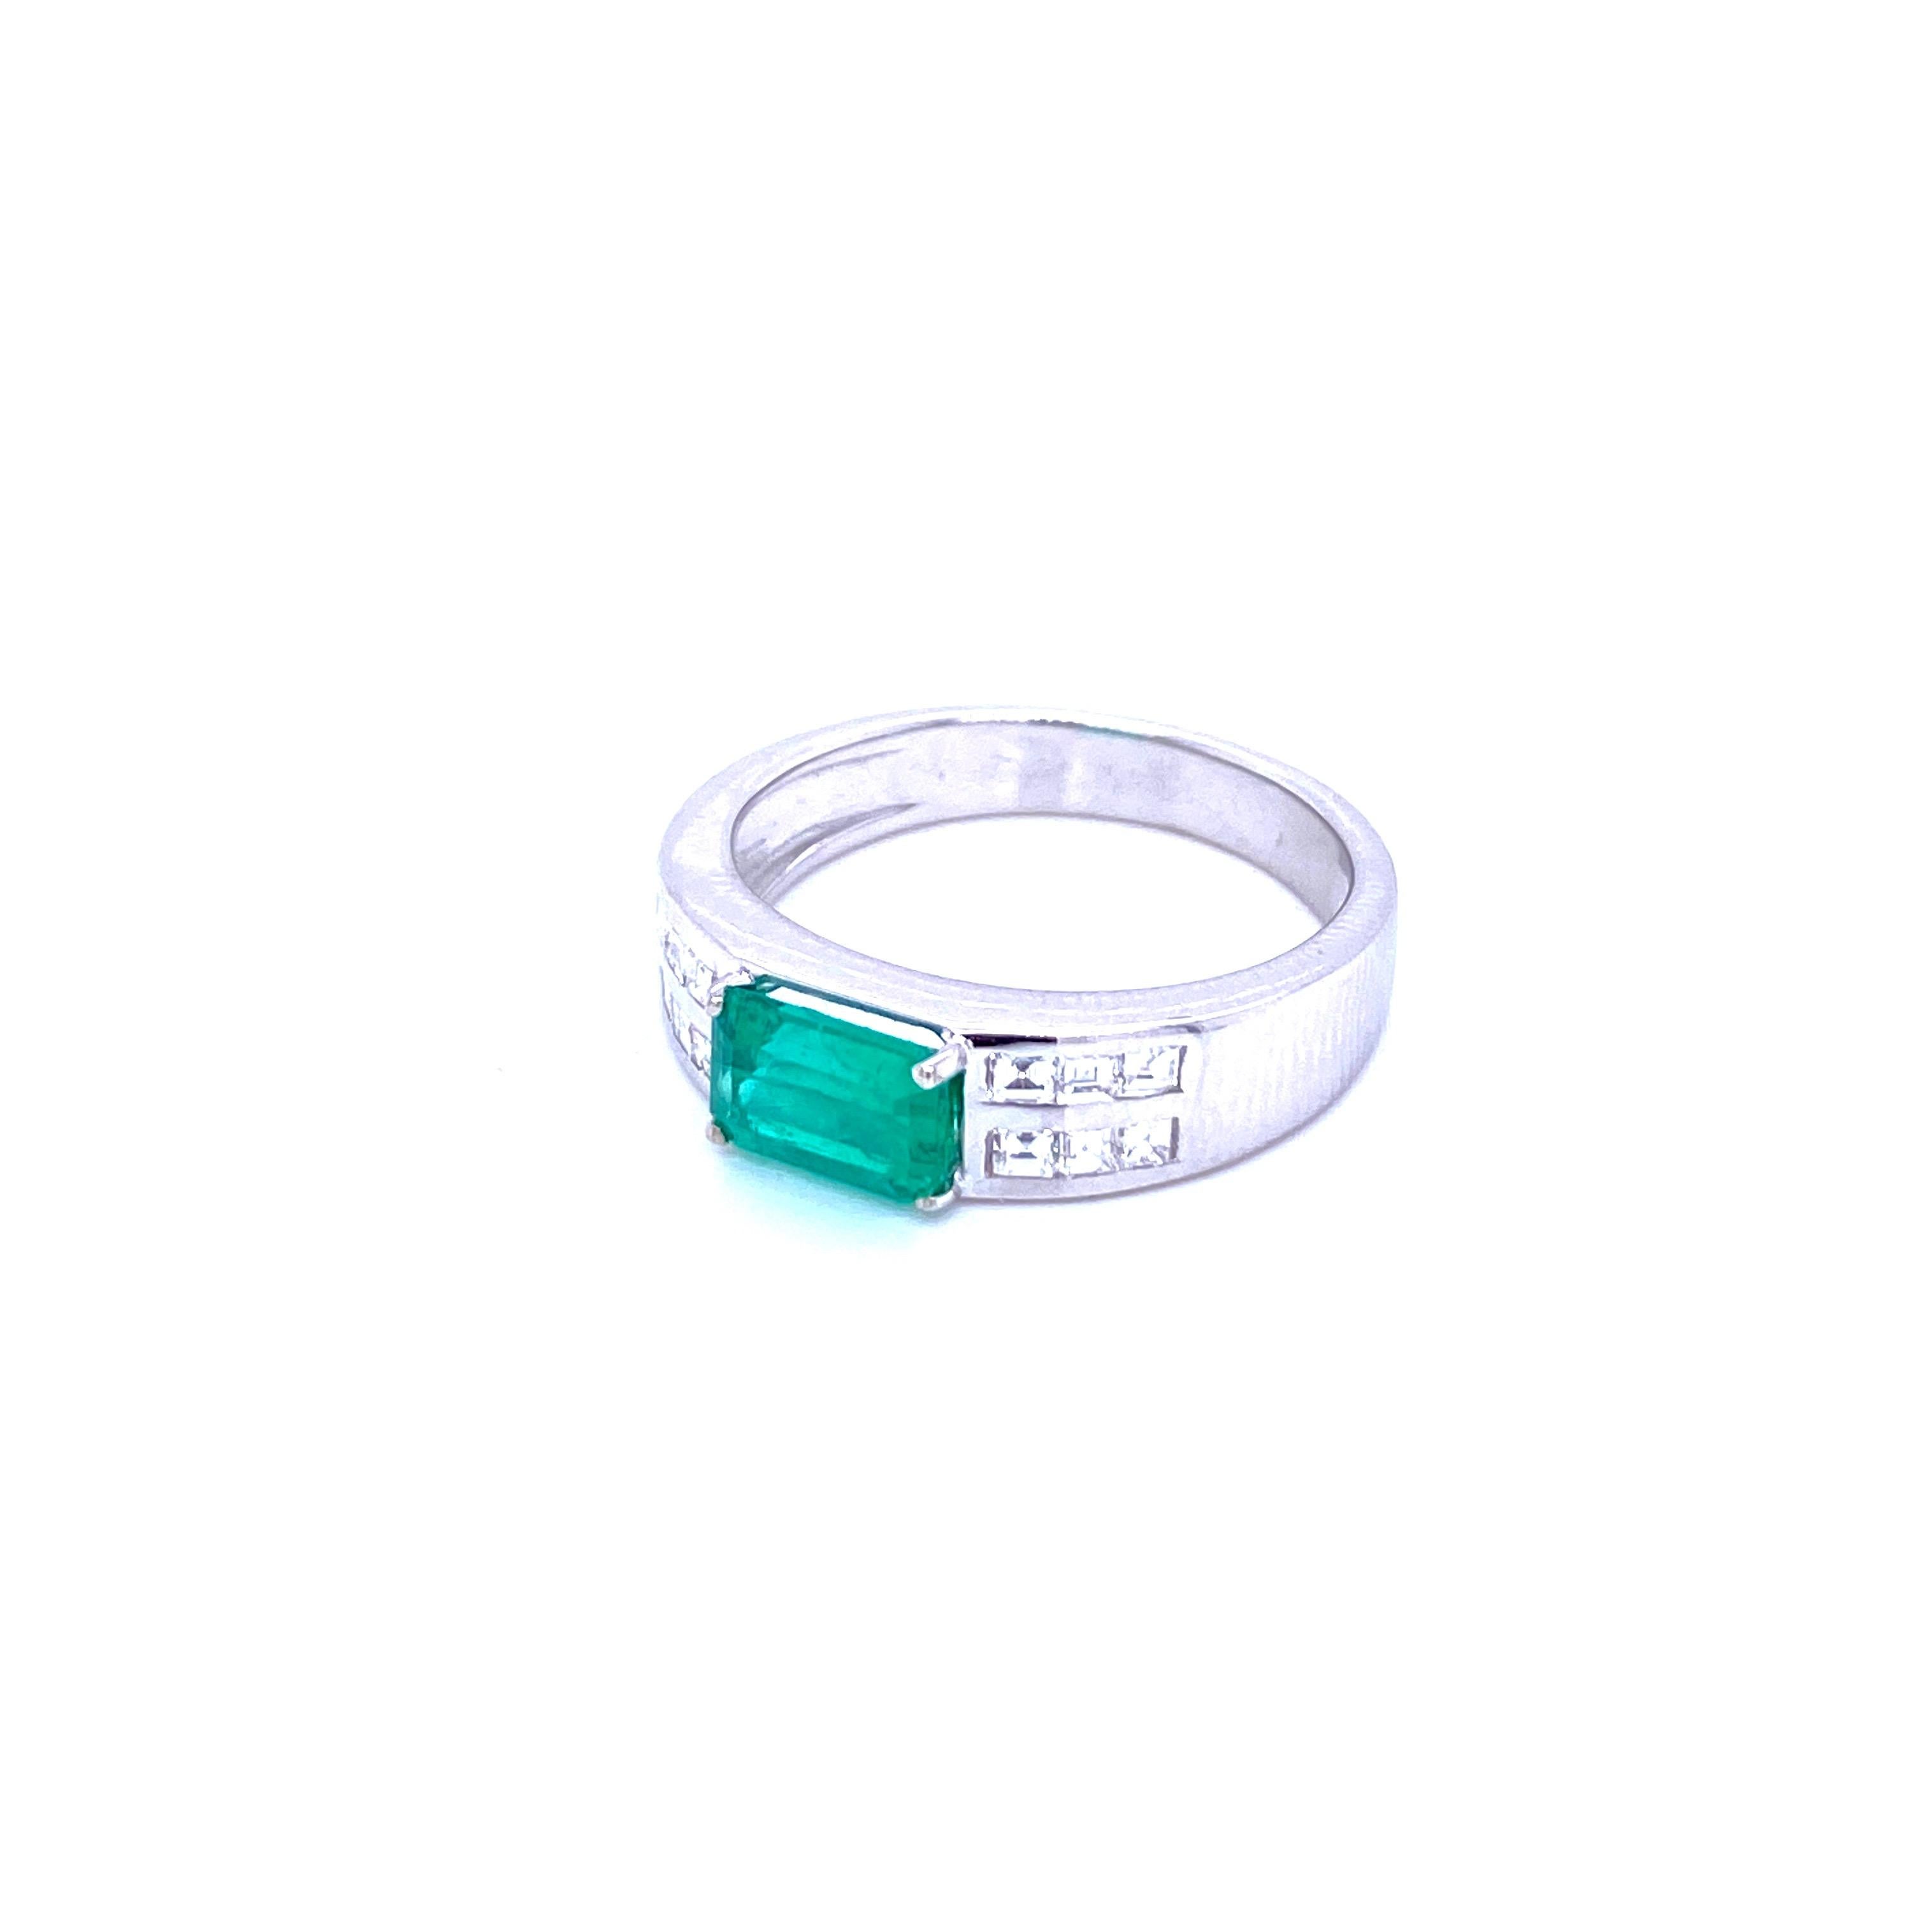 Unusual Art Deco style ring set in 18k white Gold featuring a 1.00 ct Emerald-cut Emerald origin Colombia. Flanked on each side are baguette cut diamonds totaling 0.50 carats G/H color VVS clarity. Circa 1980

CONDITION: Pre-owned - Excellent